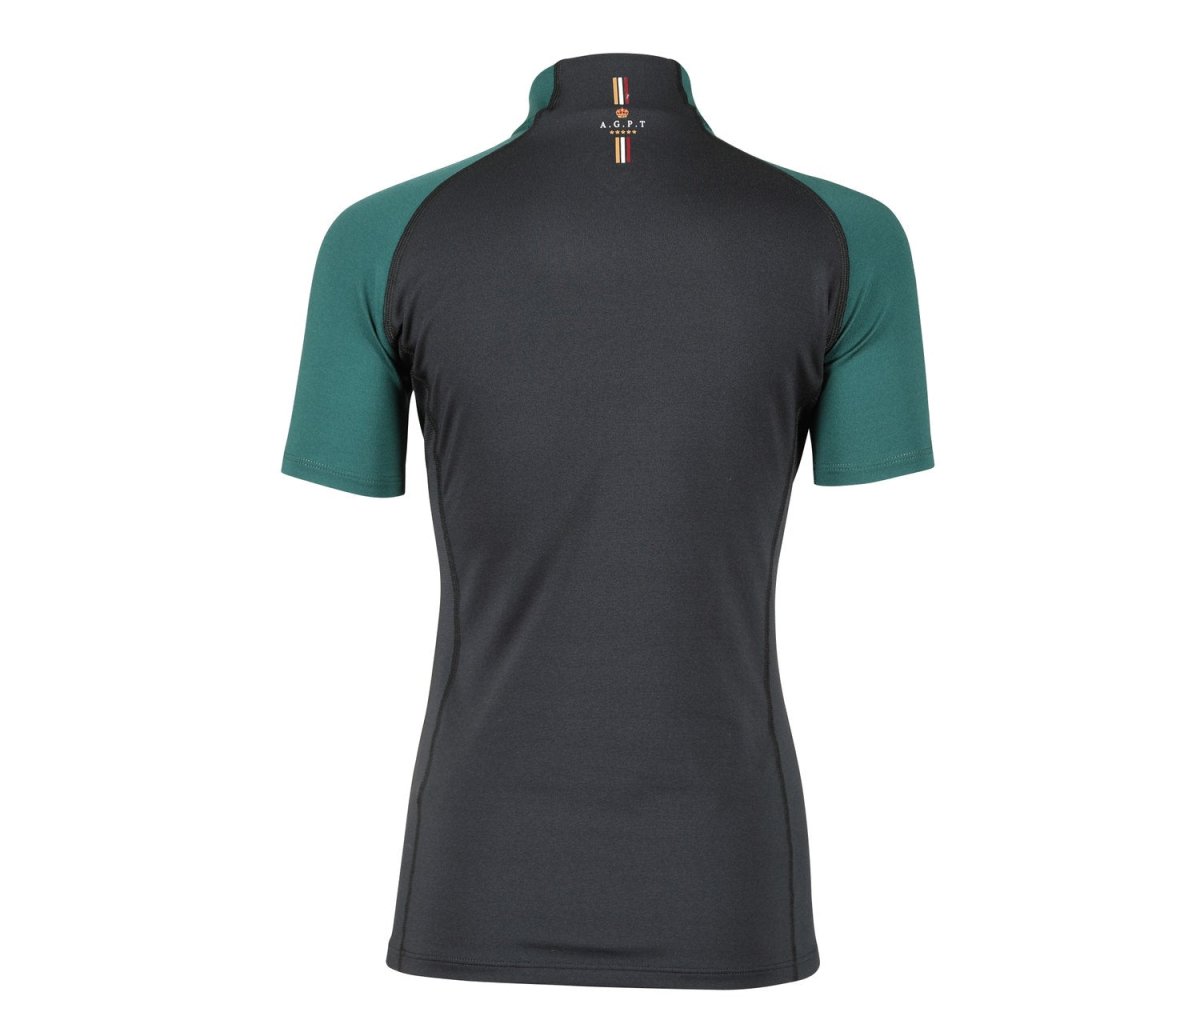 Aubrion SS24 Team Short Sleeve Base Layer - Young Rider - Black - 11/12 Years